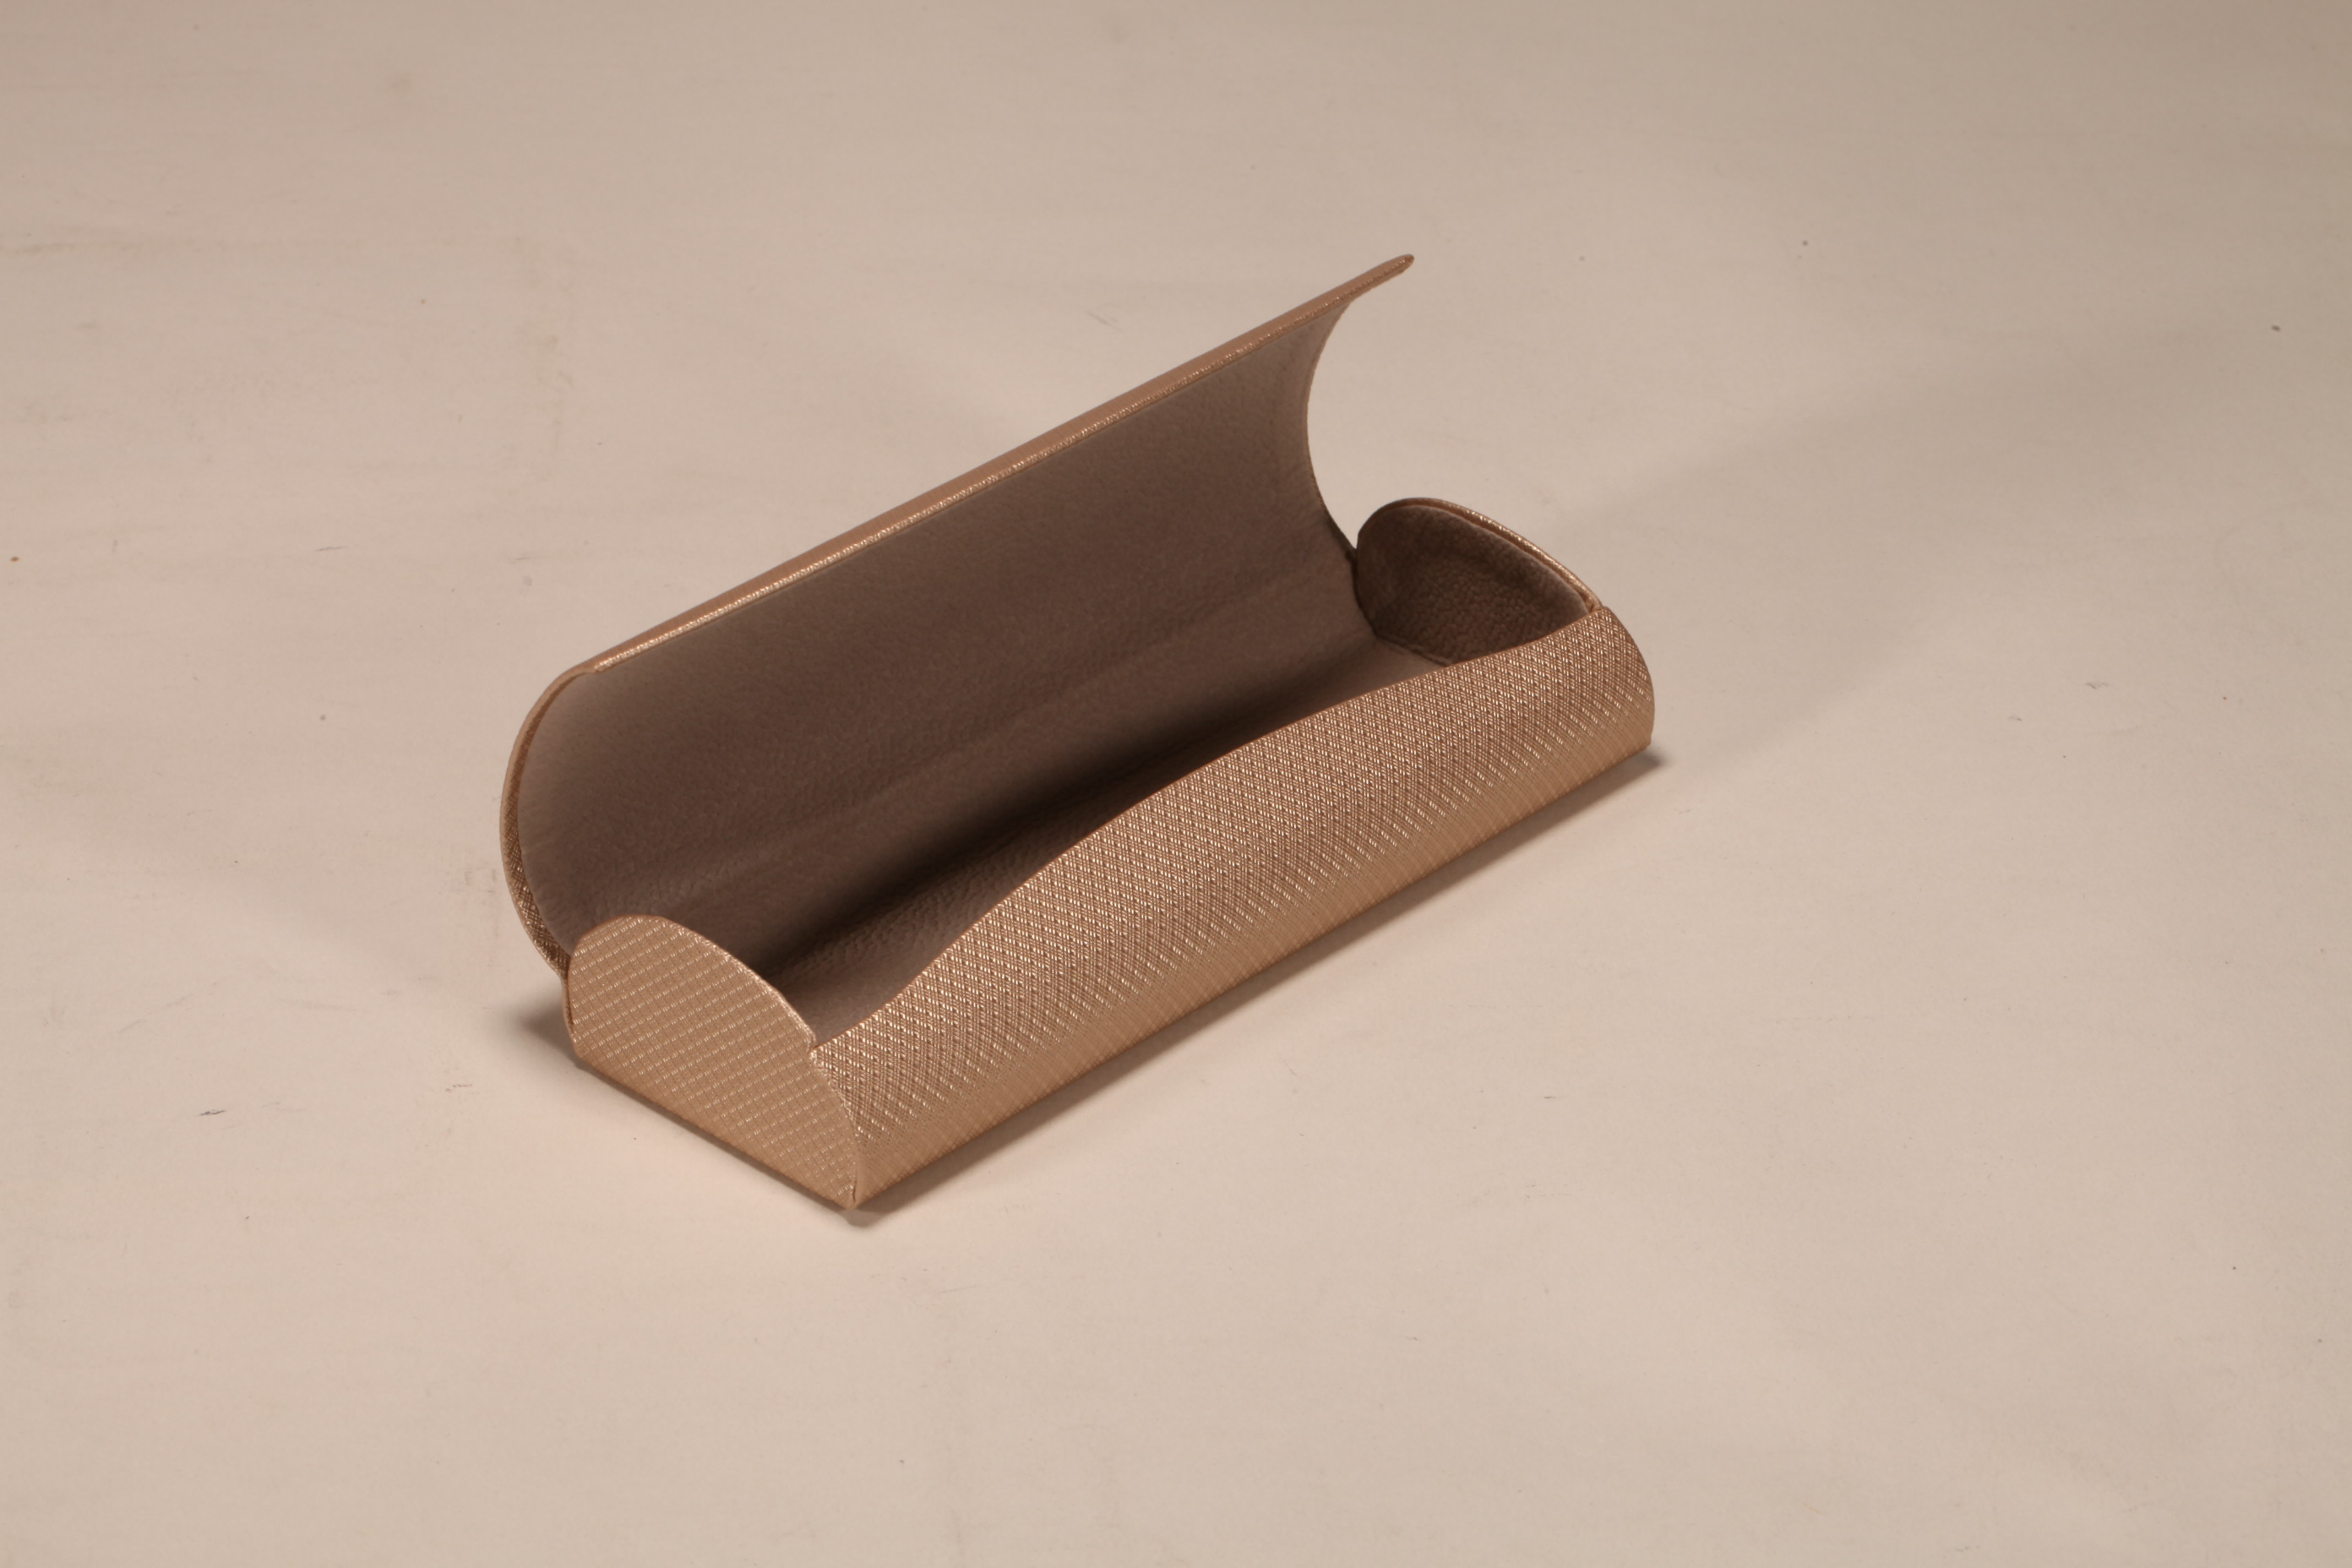 A brown-gold hand-made glasses case printed with Chinese LOGO, made of canary